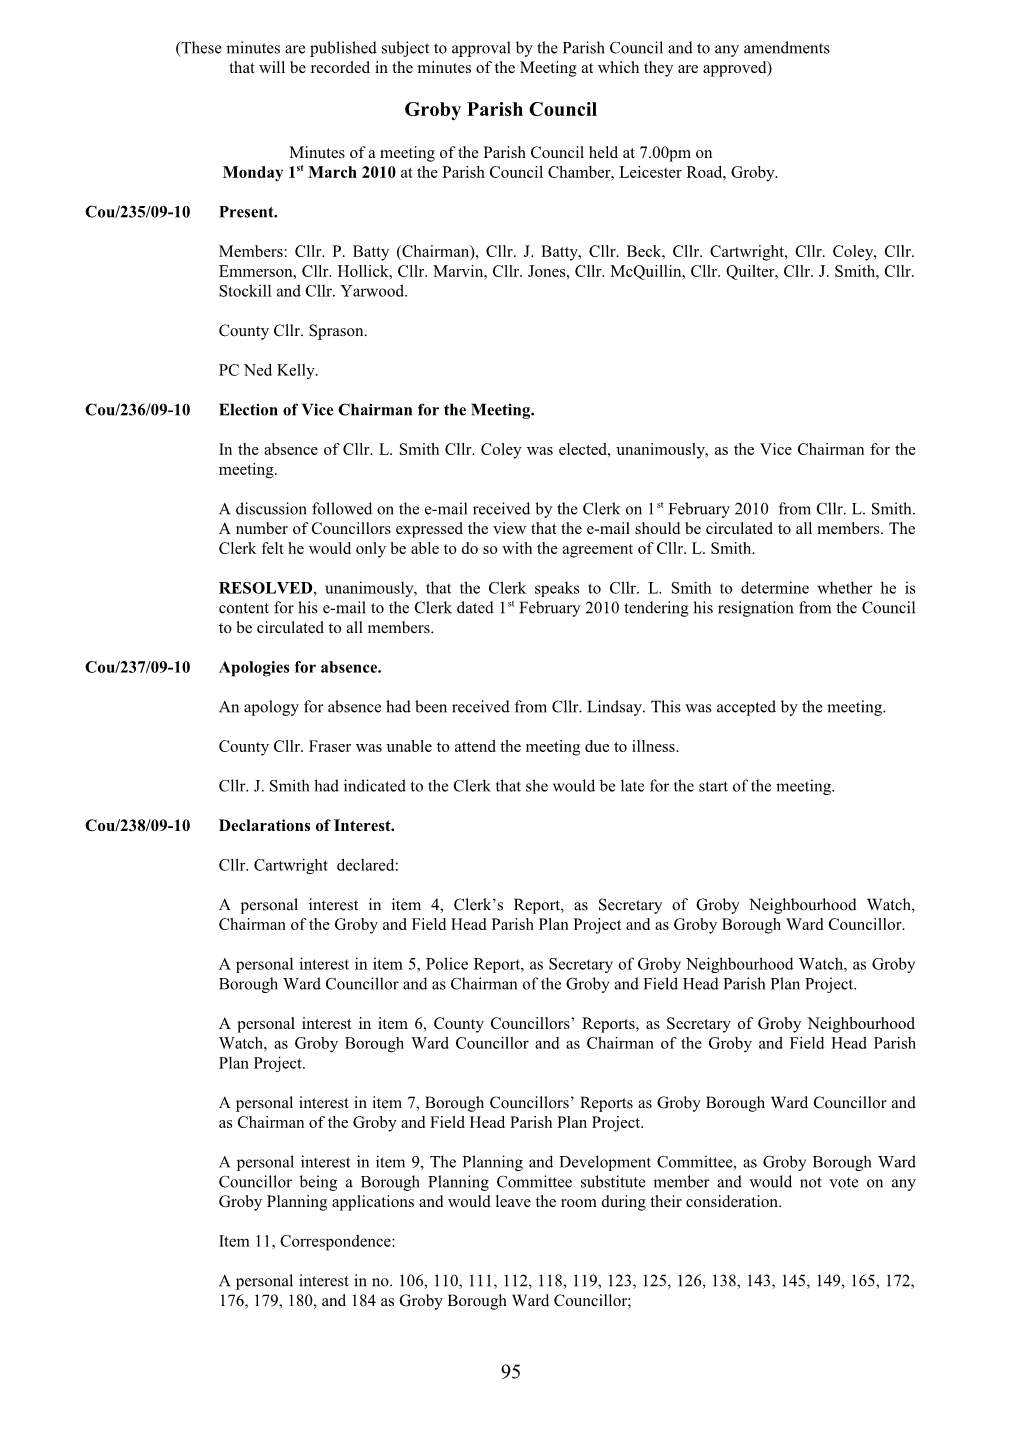 (These Minutes Are Published Subject to Approval by the Parish Council and to Any Amendments